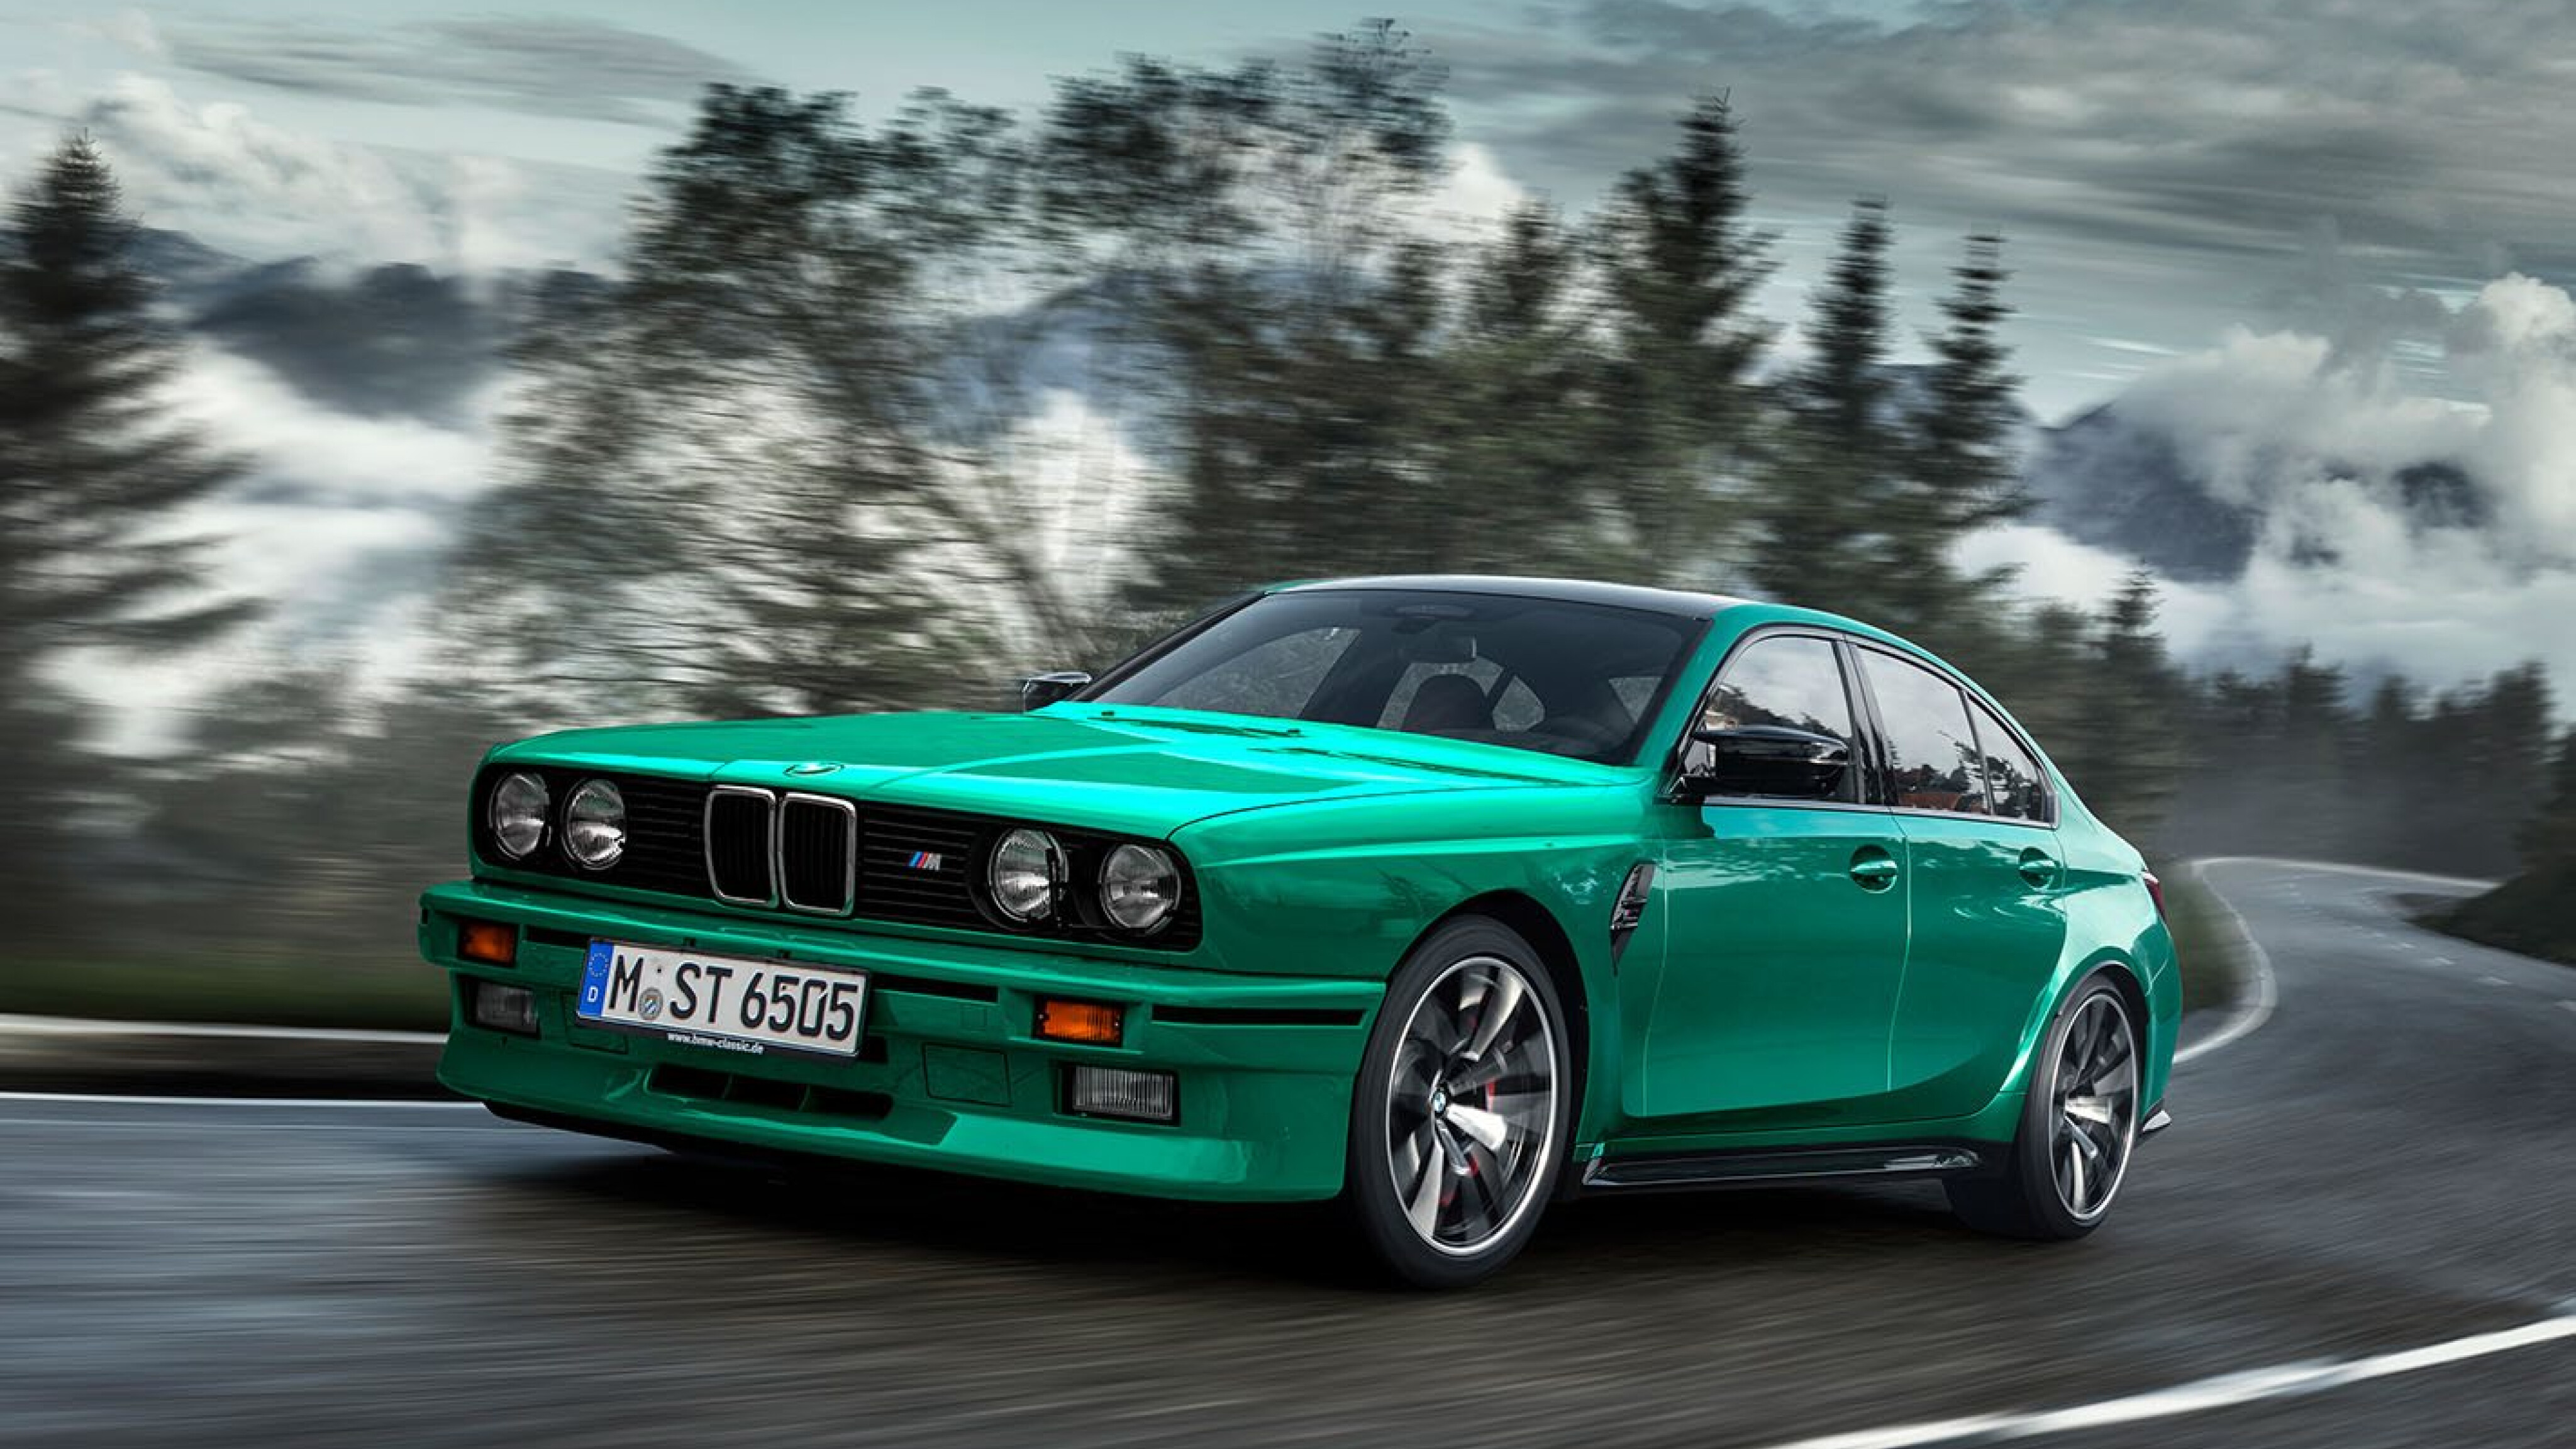 What would the 2021 BMW M3 look like if made by other manufacturers?